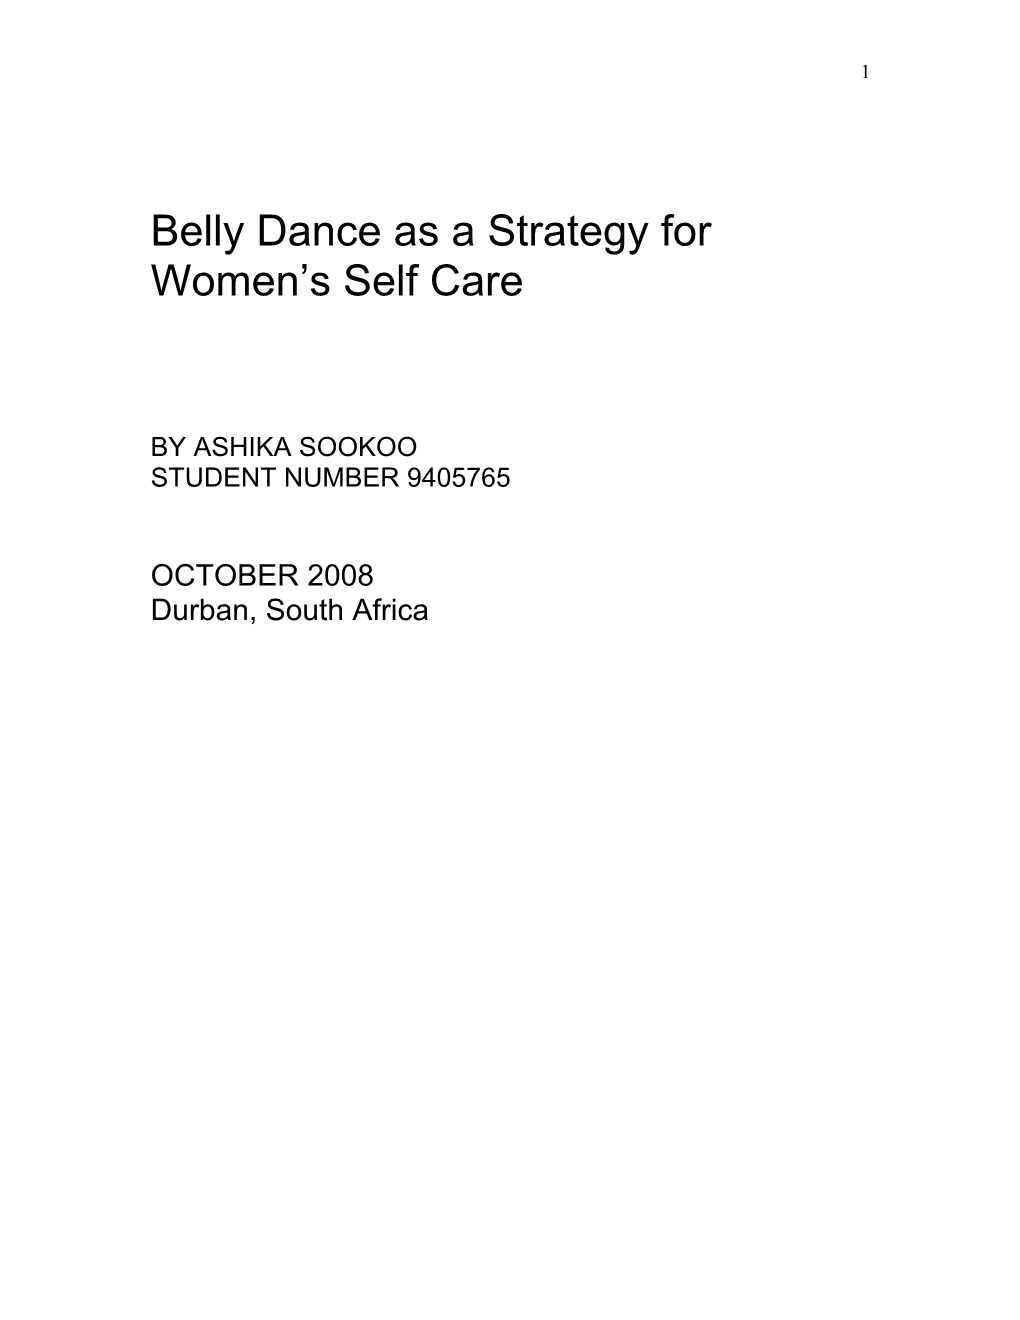 Belly Dance As a Strategy for Women's Self Care